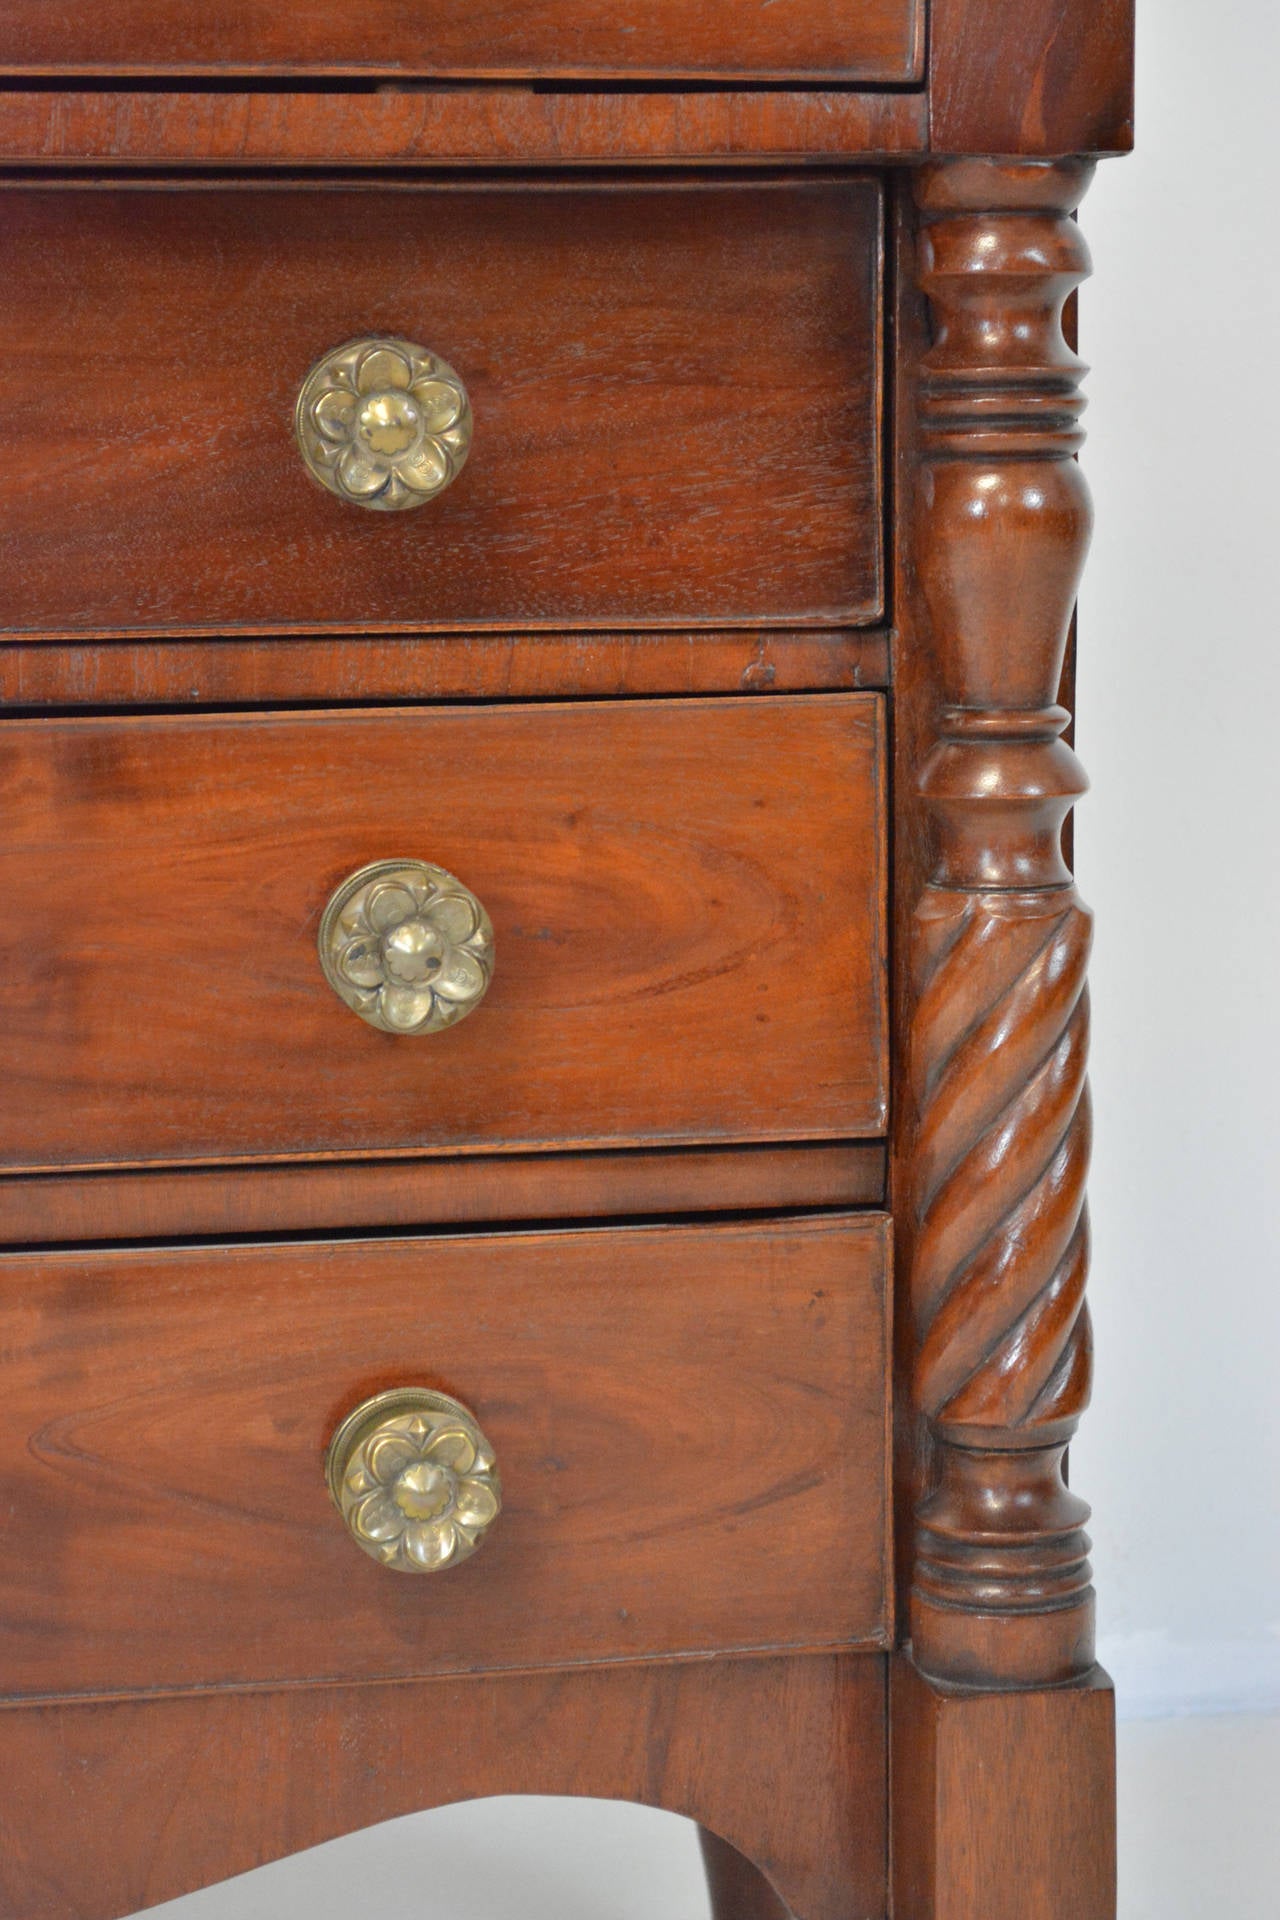 A lovely flame mahogany chest of  four drawers with a two drawer superstructure. With Scrolled apron and carved half columns, raised on turned feet. Mahogany veneers and solids.